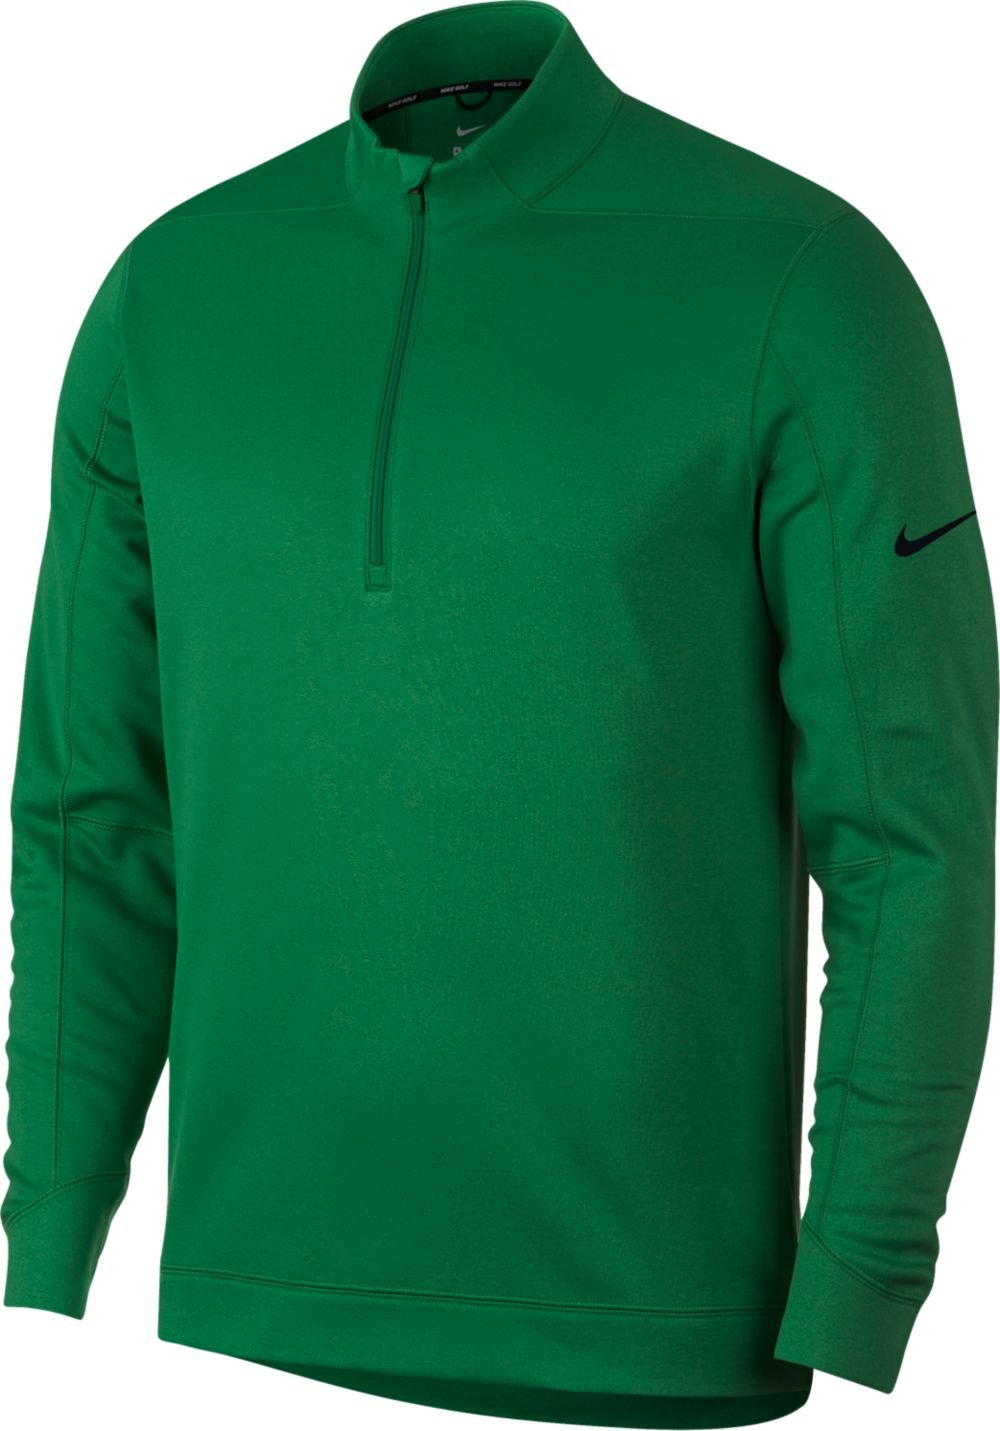 Mens Nike Therma Repel Top OLC Golf Pullovers